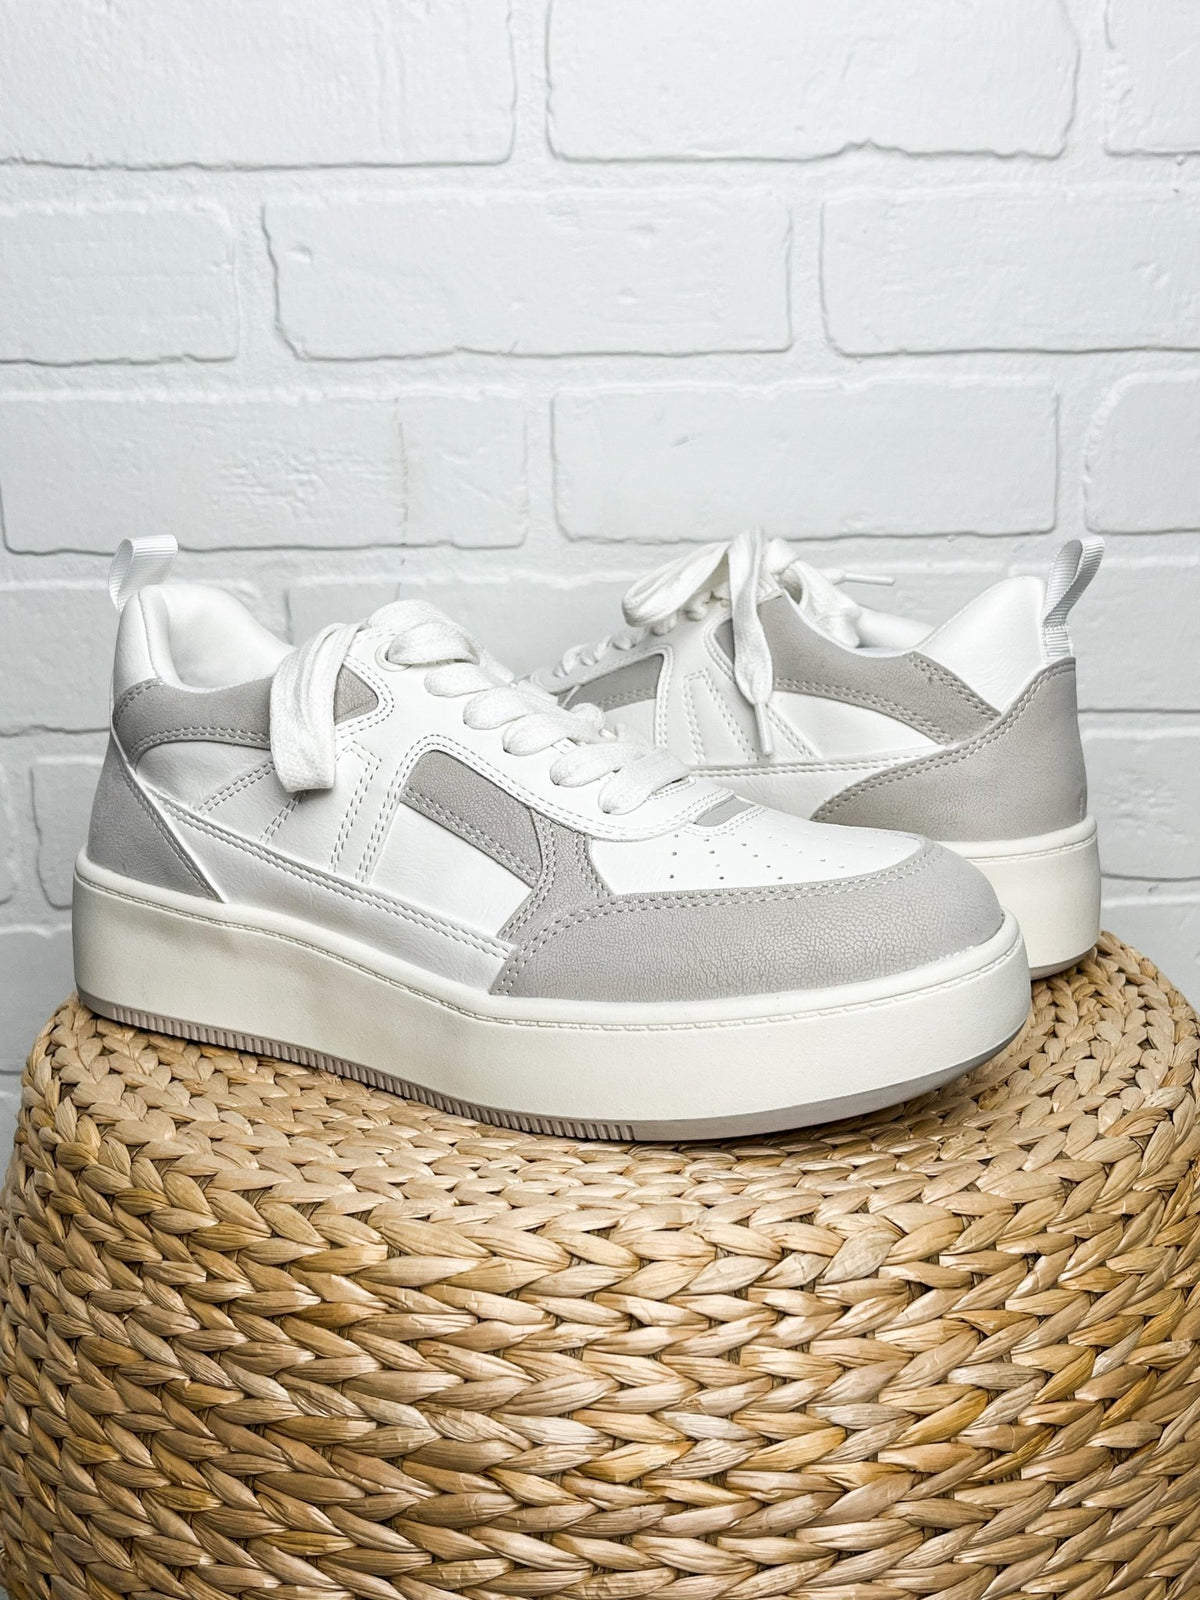 Malbru sneaker white - Cute Shoes - Trendy Shoes at Lush Fashion Lounge Boutique in Oklahoma City